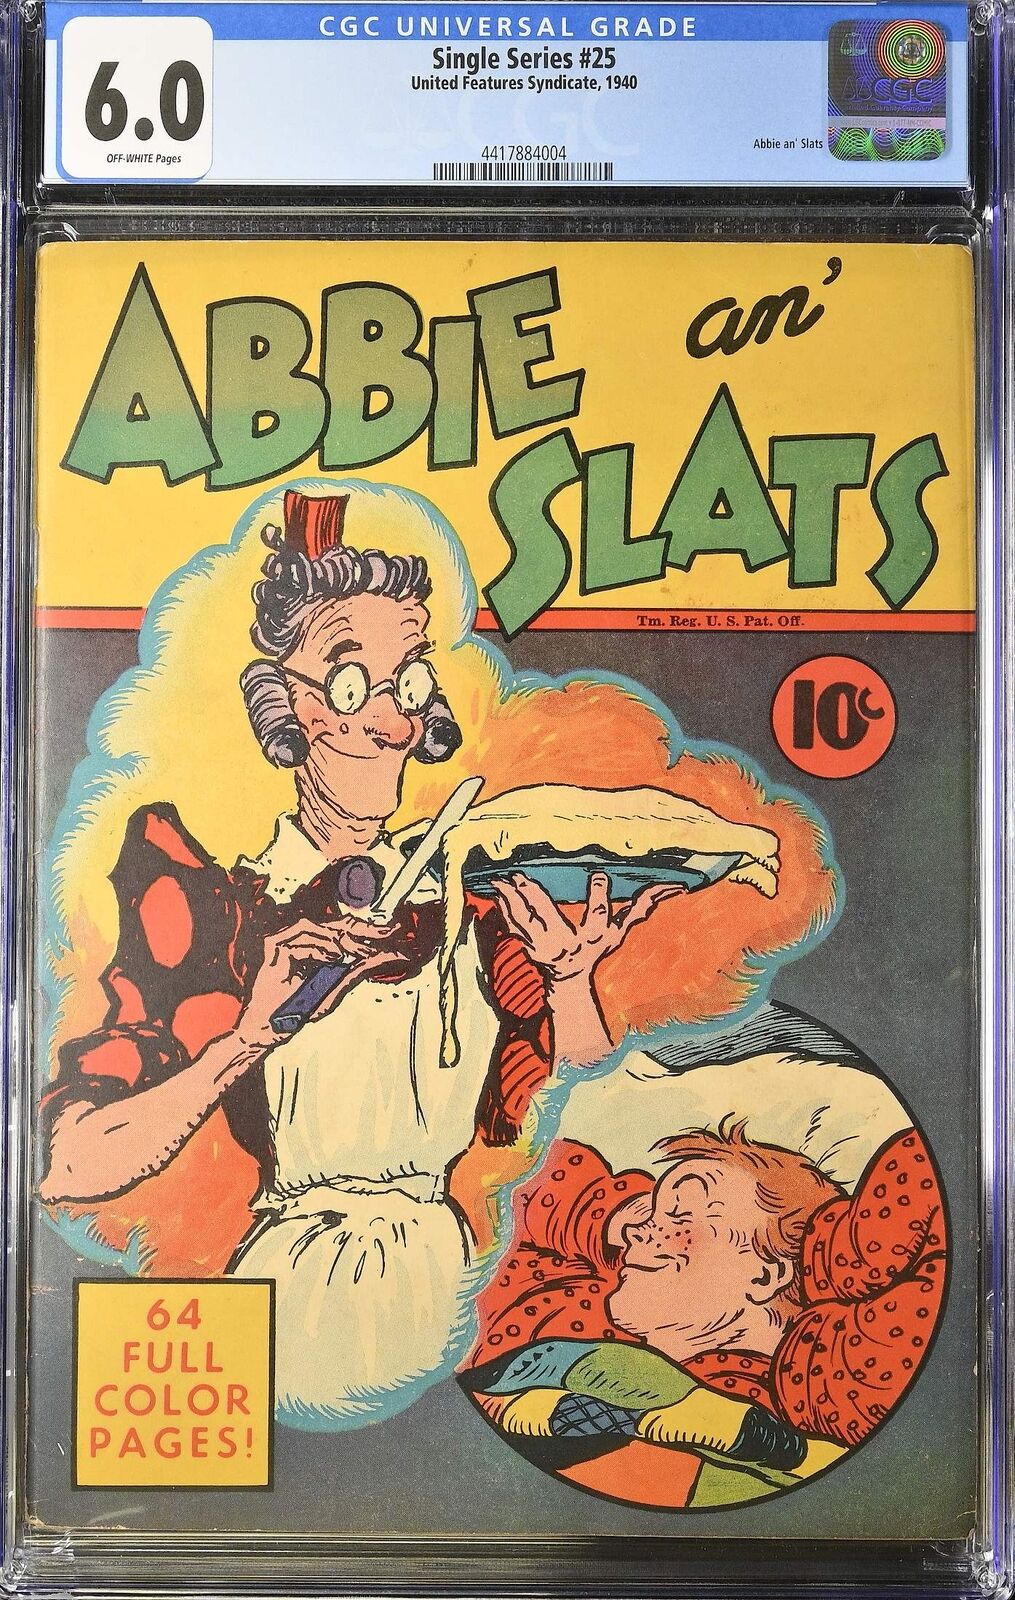 Single Series Abbie an' Slats #25 United Features (1940) 6.0 FN CGC Graded Comic